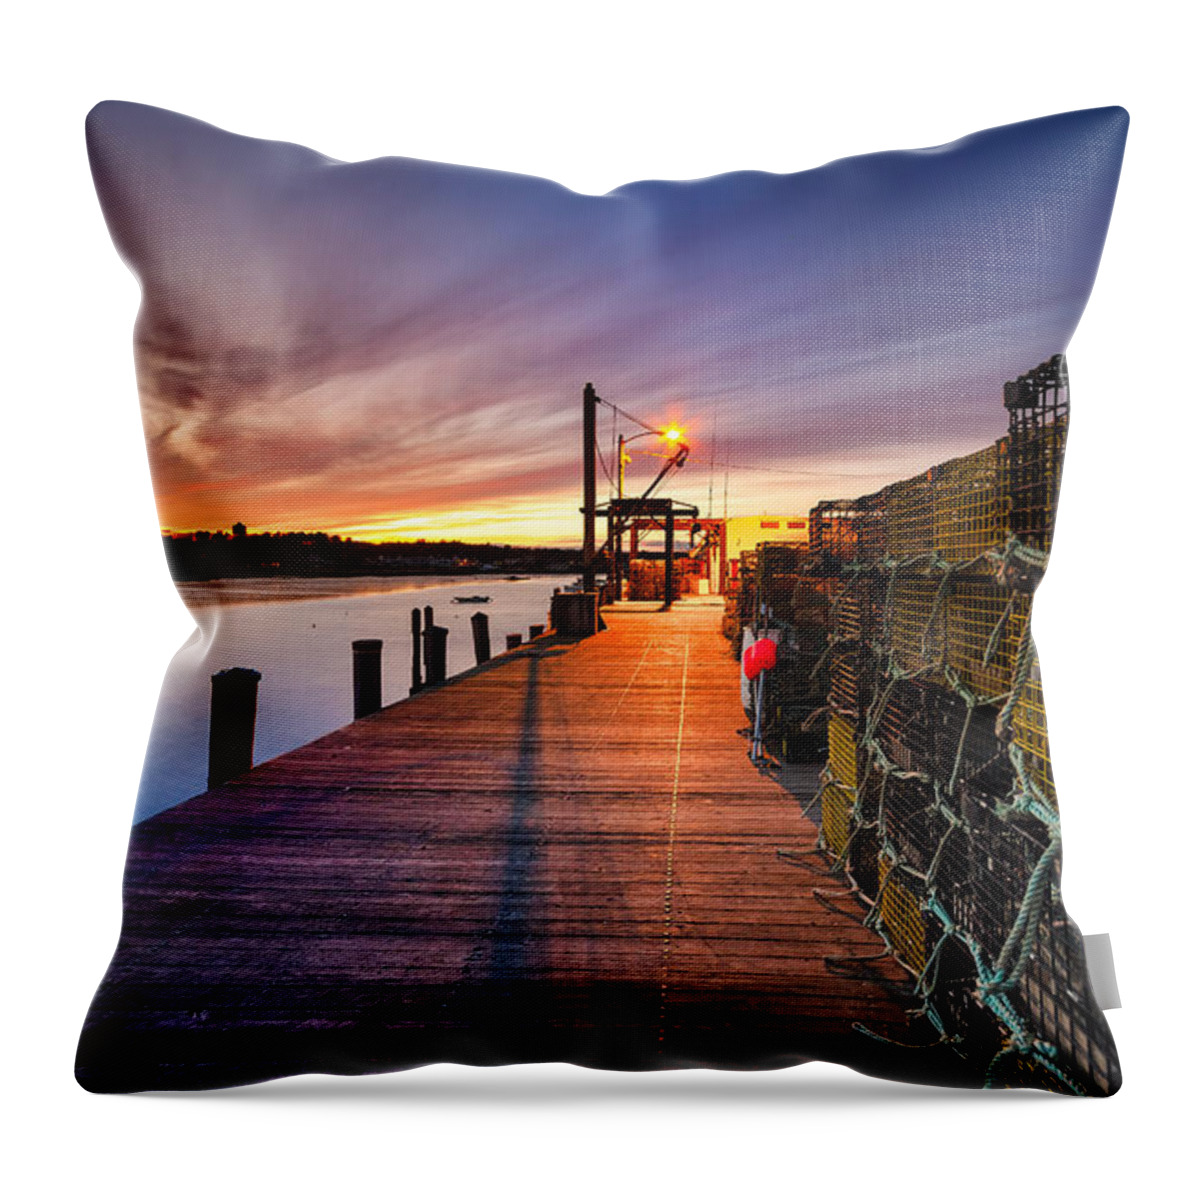 Cape Porpoise Throw Pillow featuring the photograph Cape Porpoise #1 by Robert Clifford